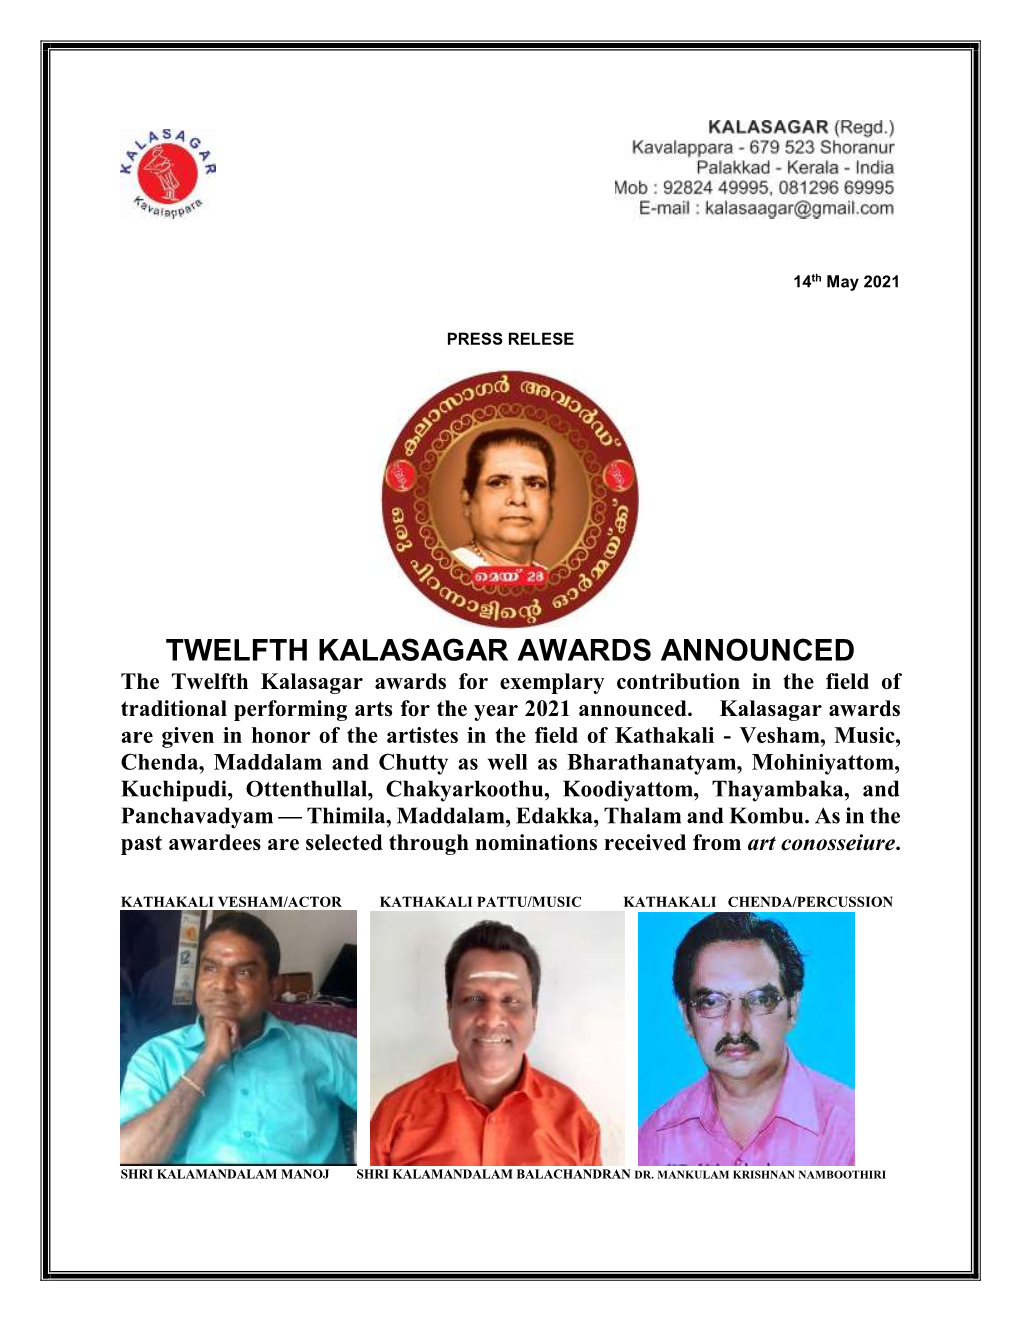 TWELFTH KALASAGAR AWARDS ANNOUNCED the Twelfth Kalasagar Awards for Exemplary Contribution in the Field of Traditional Performing Arts for the Year 2021 Announced